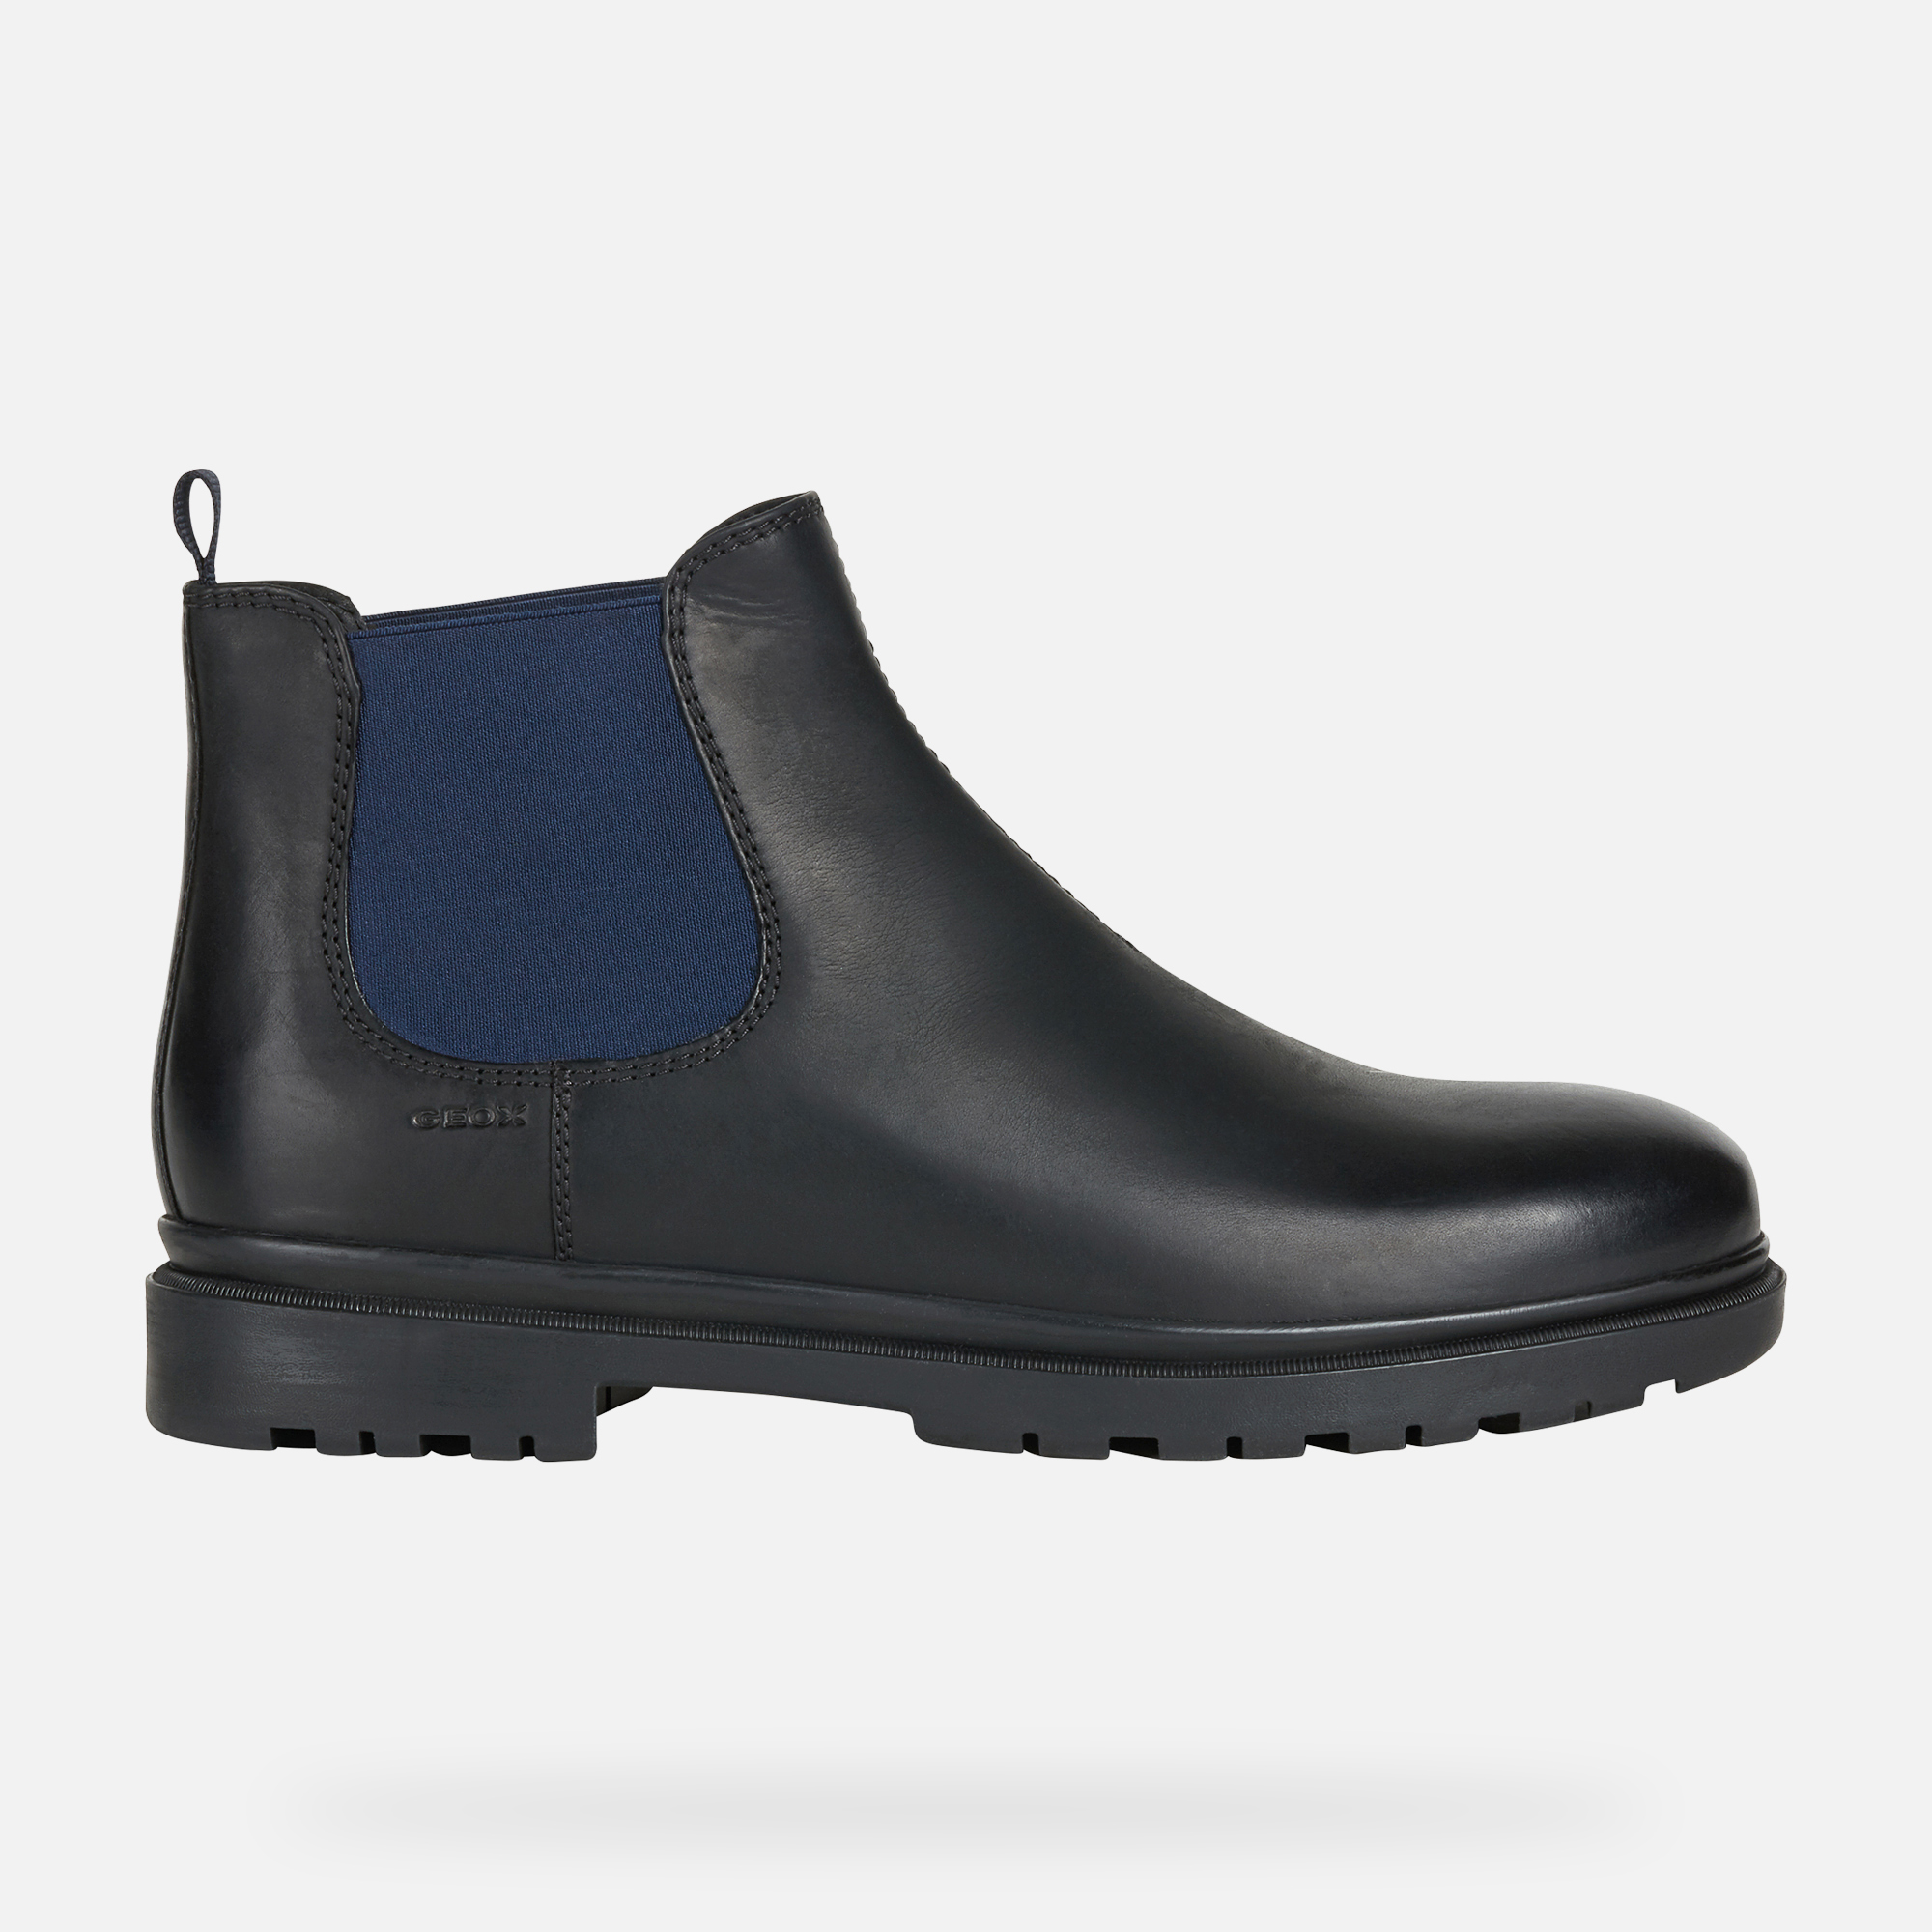 Geox® ANDALO Man: Black and Navy blue Ankle Boots | FW21 Geox®